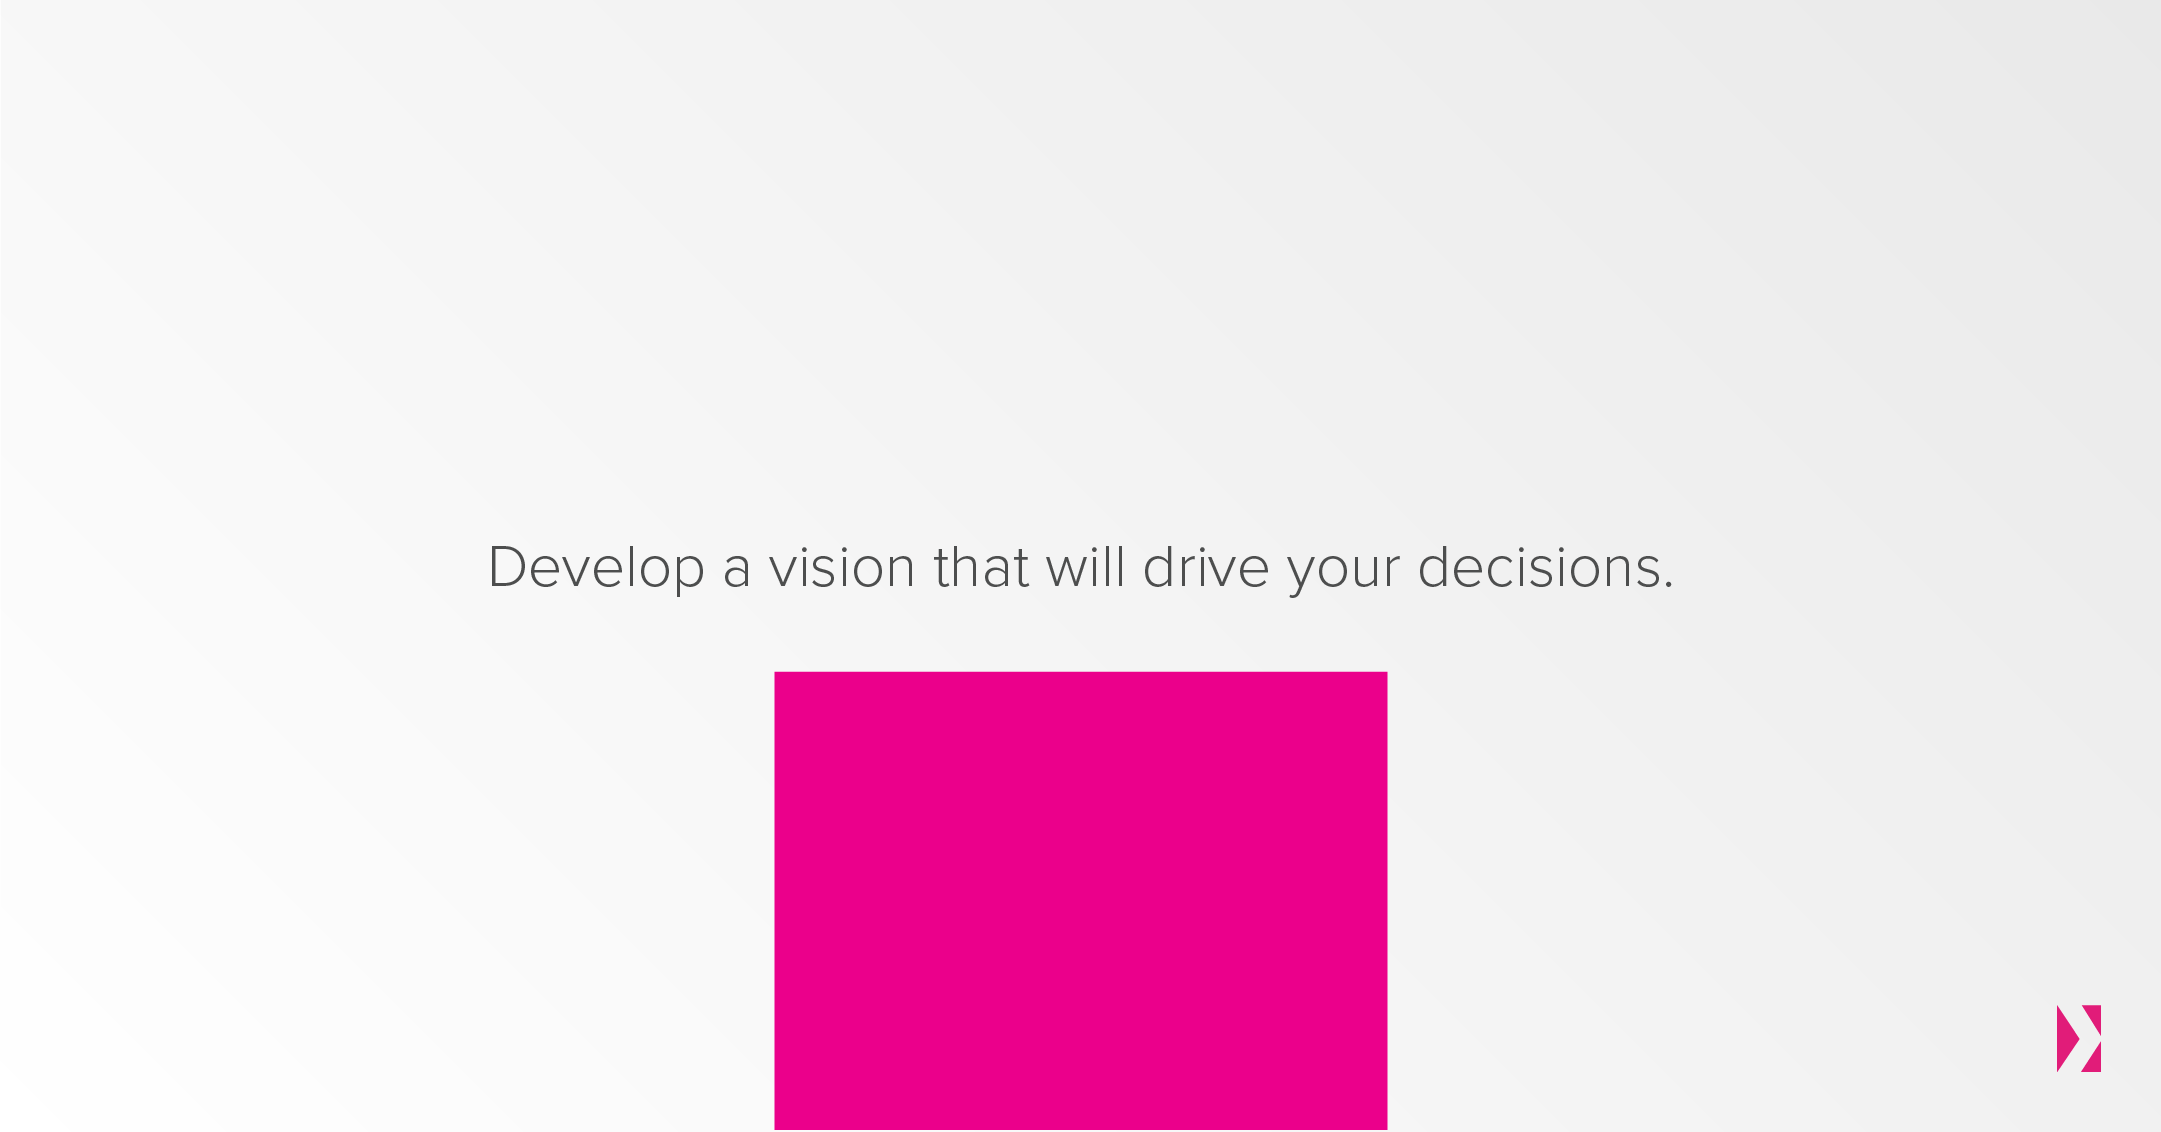 Develop a vision that will drive your decisions.